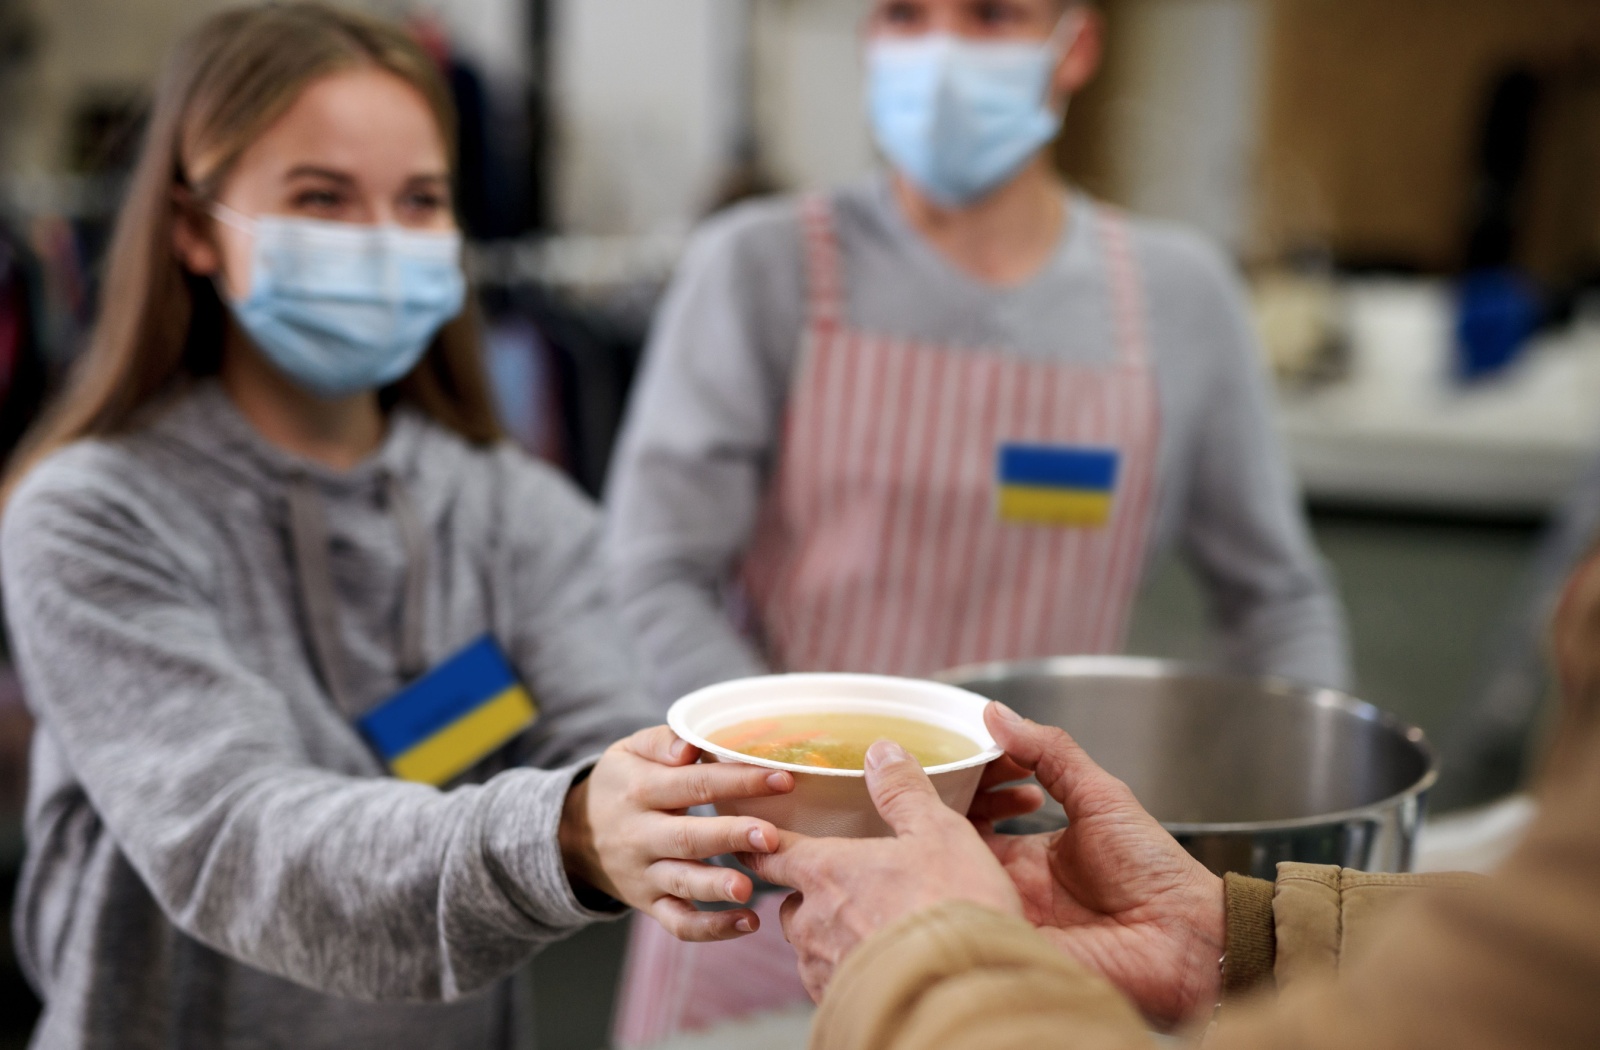 A volunteer in a soup kitchen with a mask on her face smiles while handing a bowl of soup to someone.
